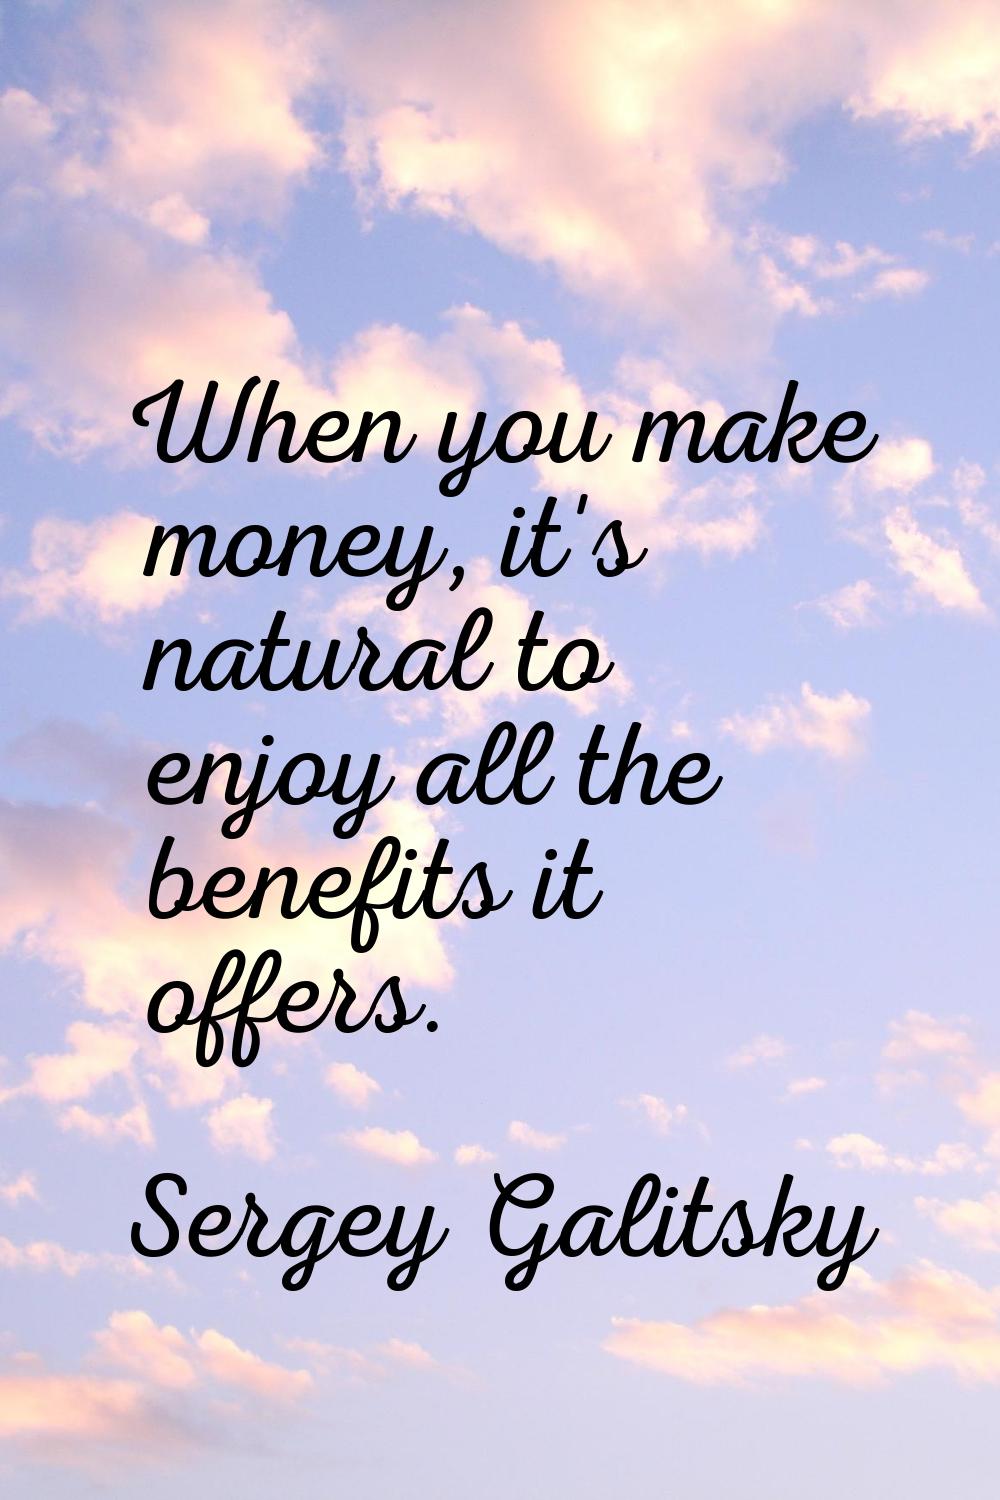 When you make money, it's natural to enjoy all the benefits it offers.